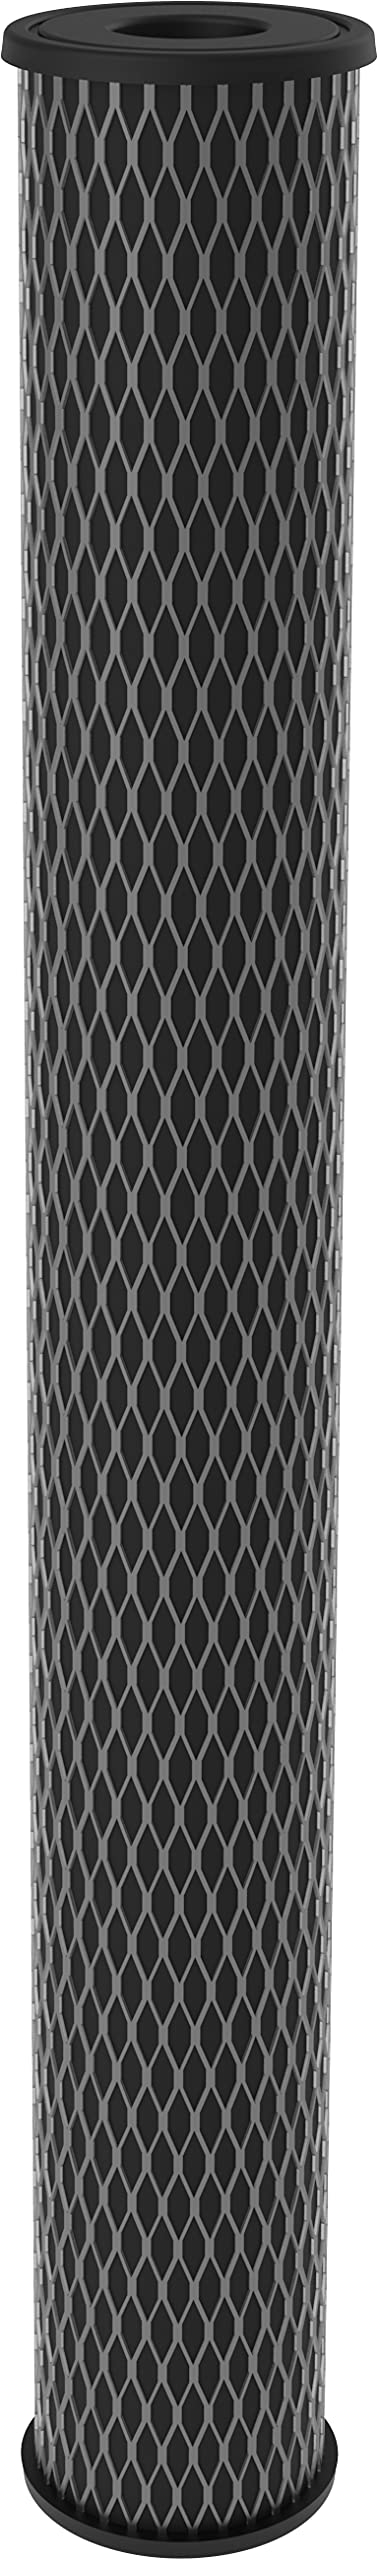 Pentair Pentek C1-20 Carbon Water Filter, 20-Inch, Whole House Dual Purpose Powdered Activated Carbon-Impregnated Cellulose Replacement Cartridge, 20